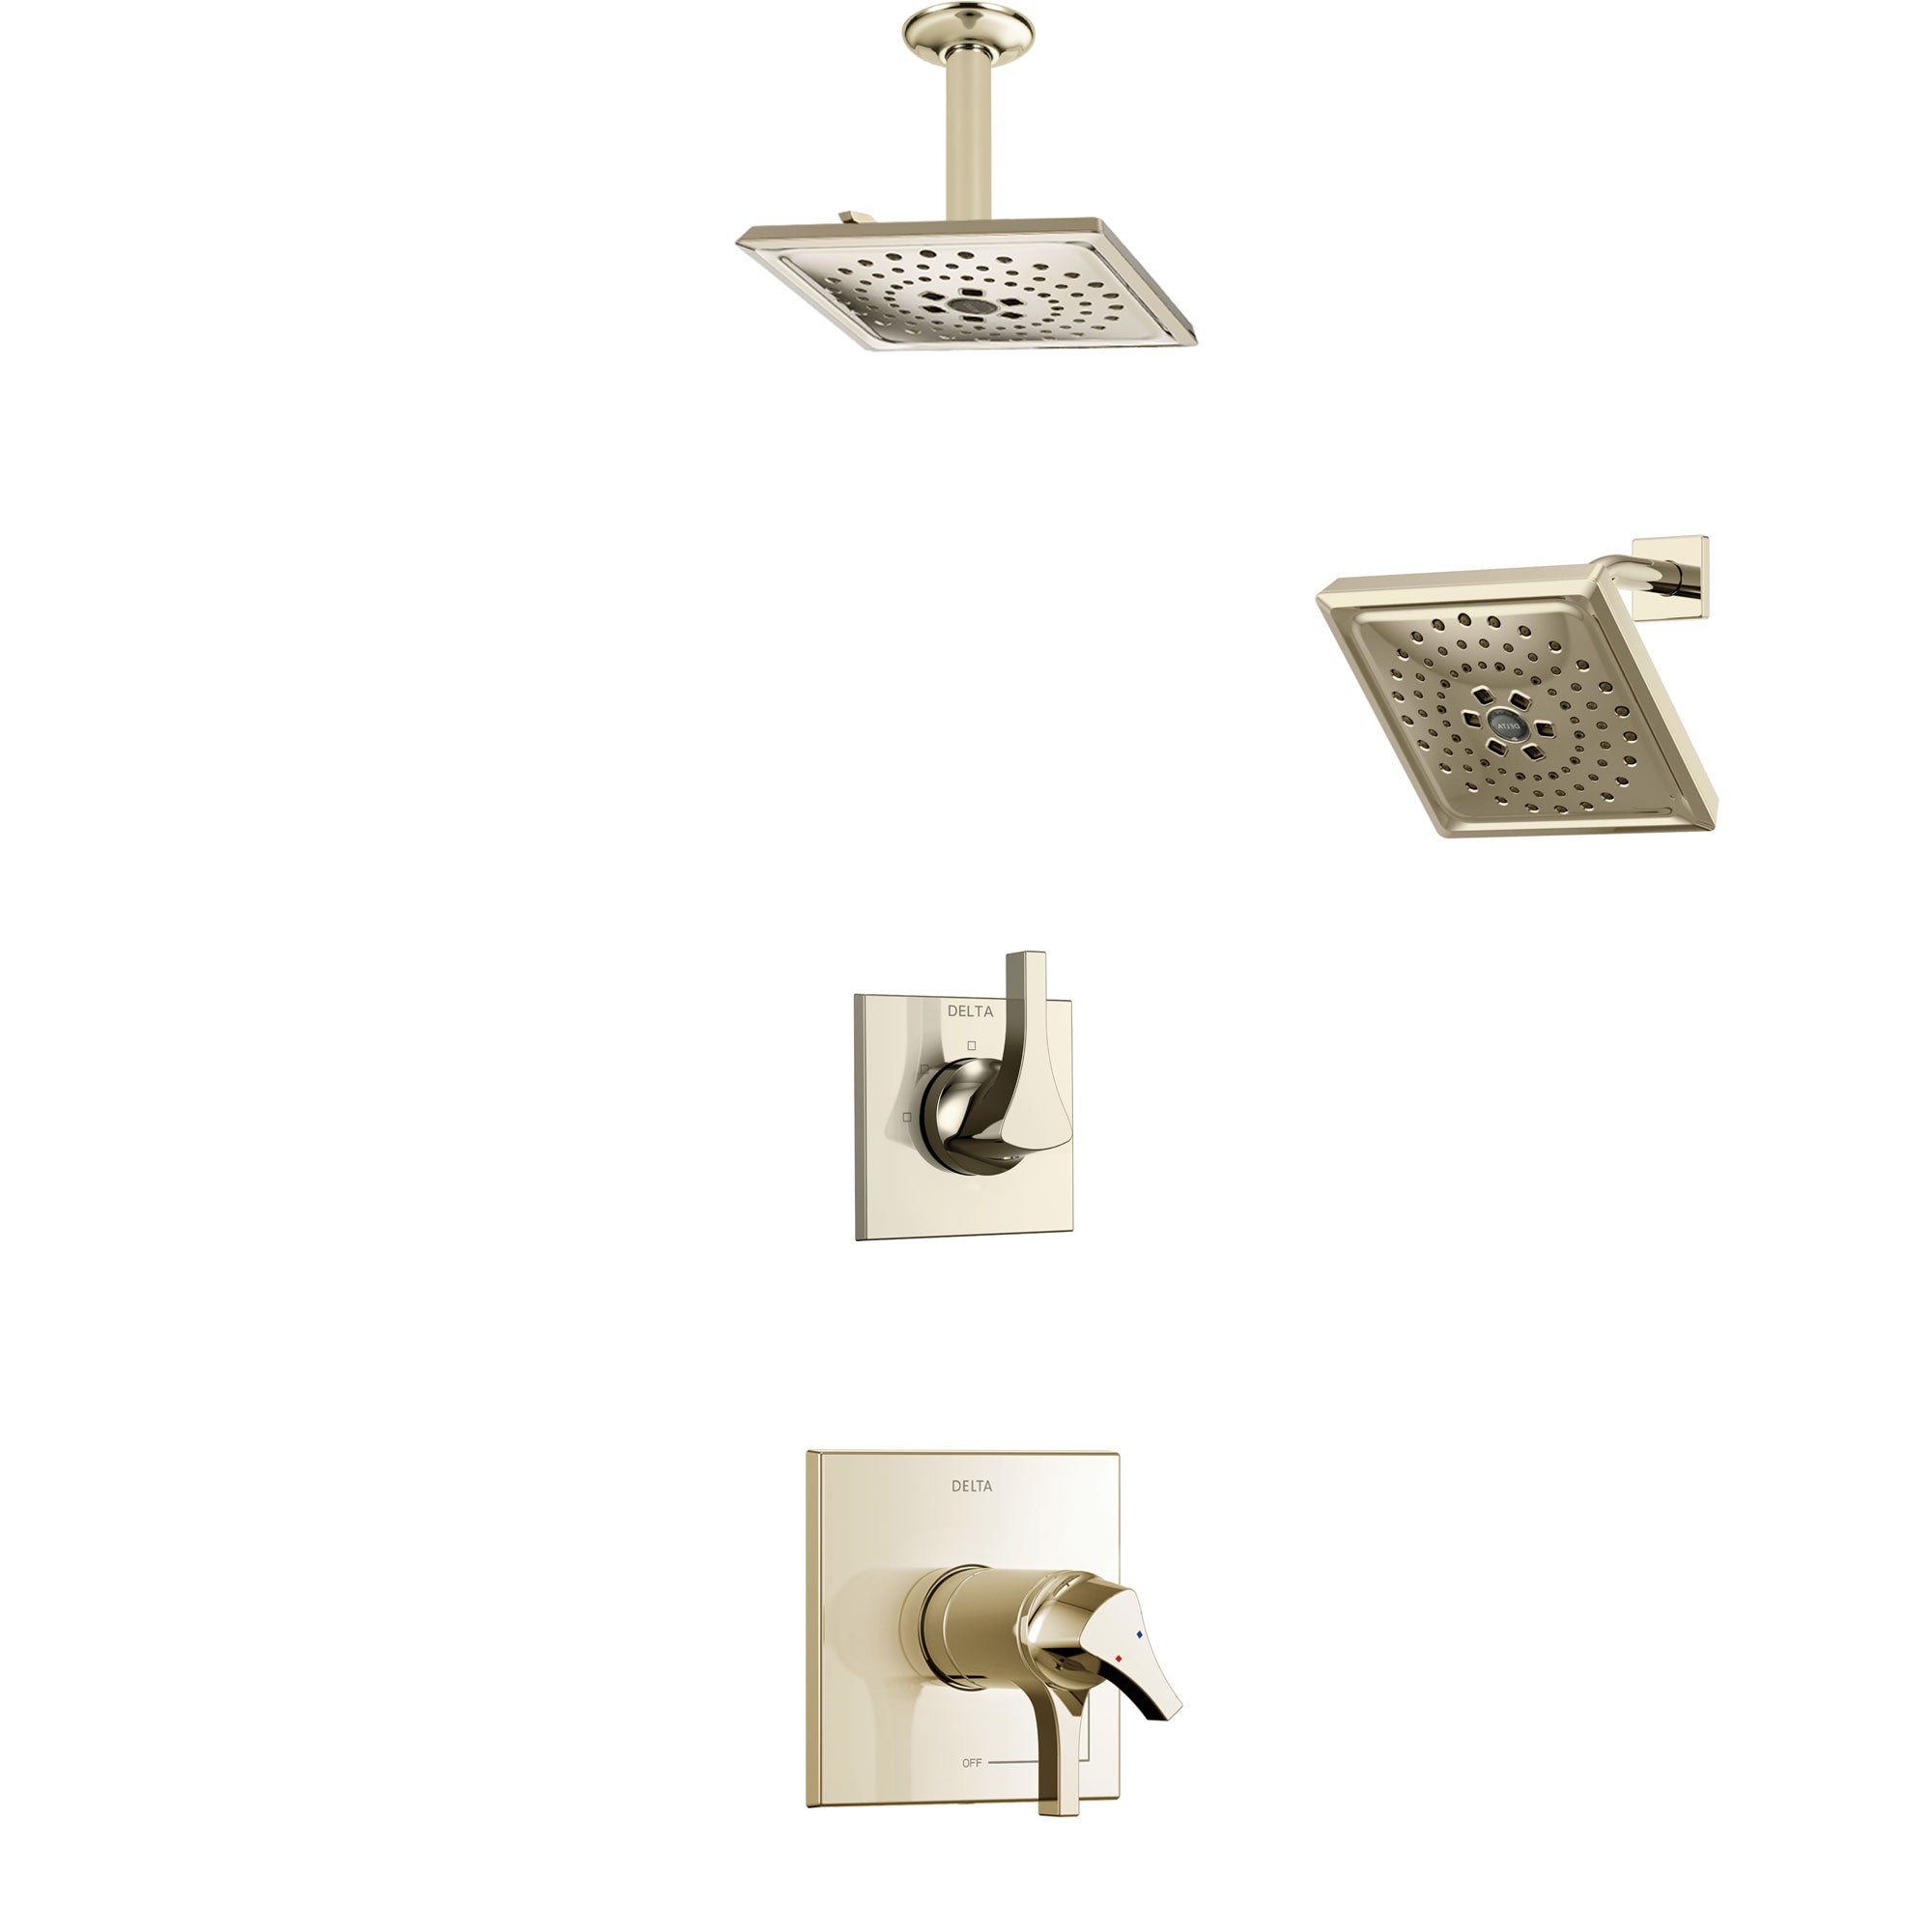 Delta Zura Polished Nickel Shower System with Dual Thermostatic Control Handle, Diverter, Showerhead, and Ceiling Mount Showerhead SS17T274PN5